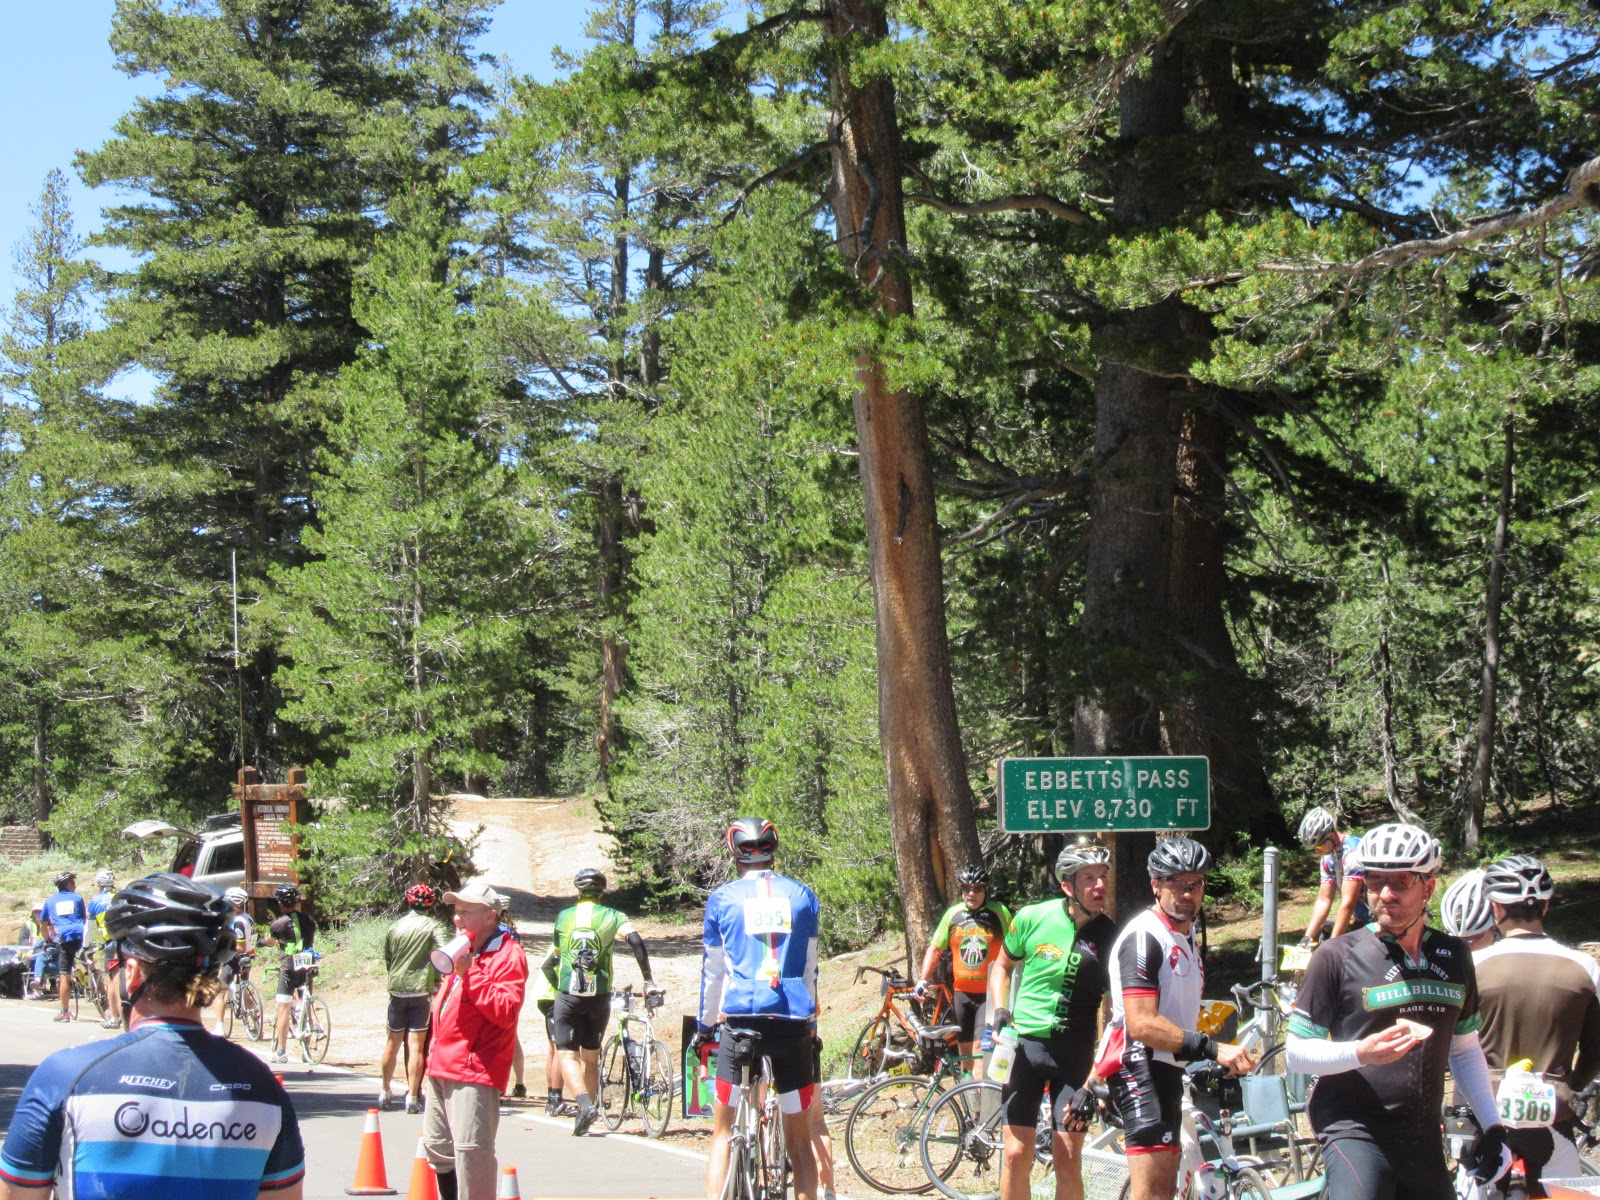 Cyclists congregate next to sign for Ebbetts Pass, Death Ride